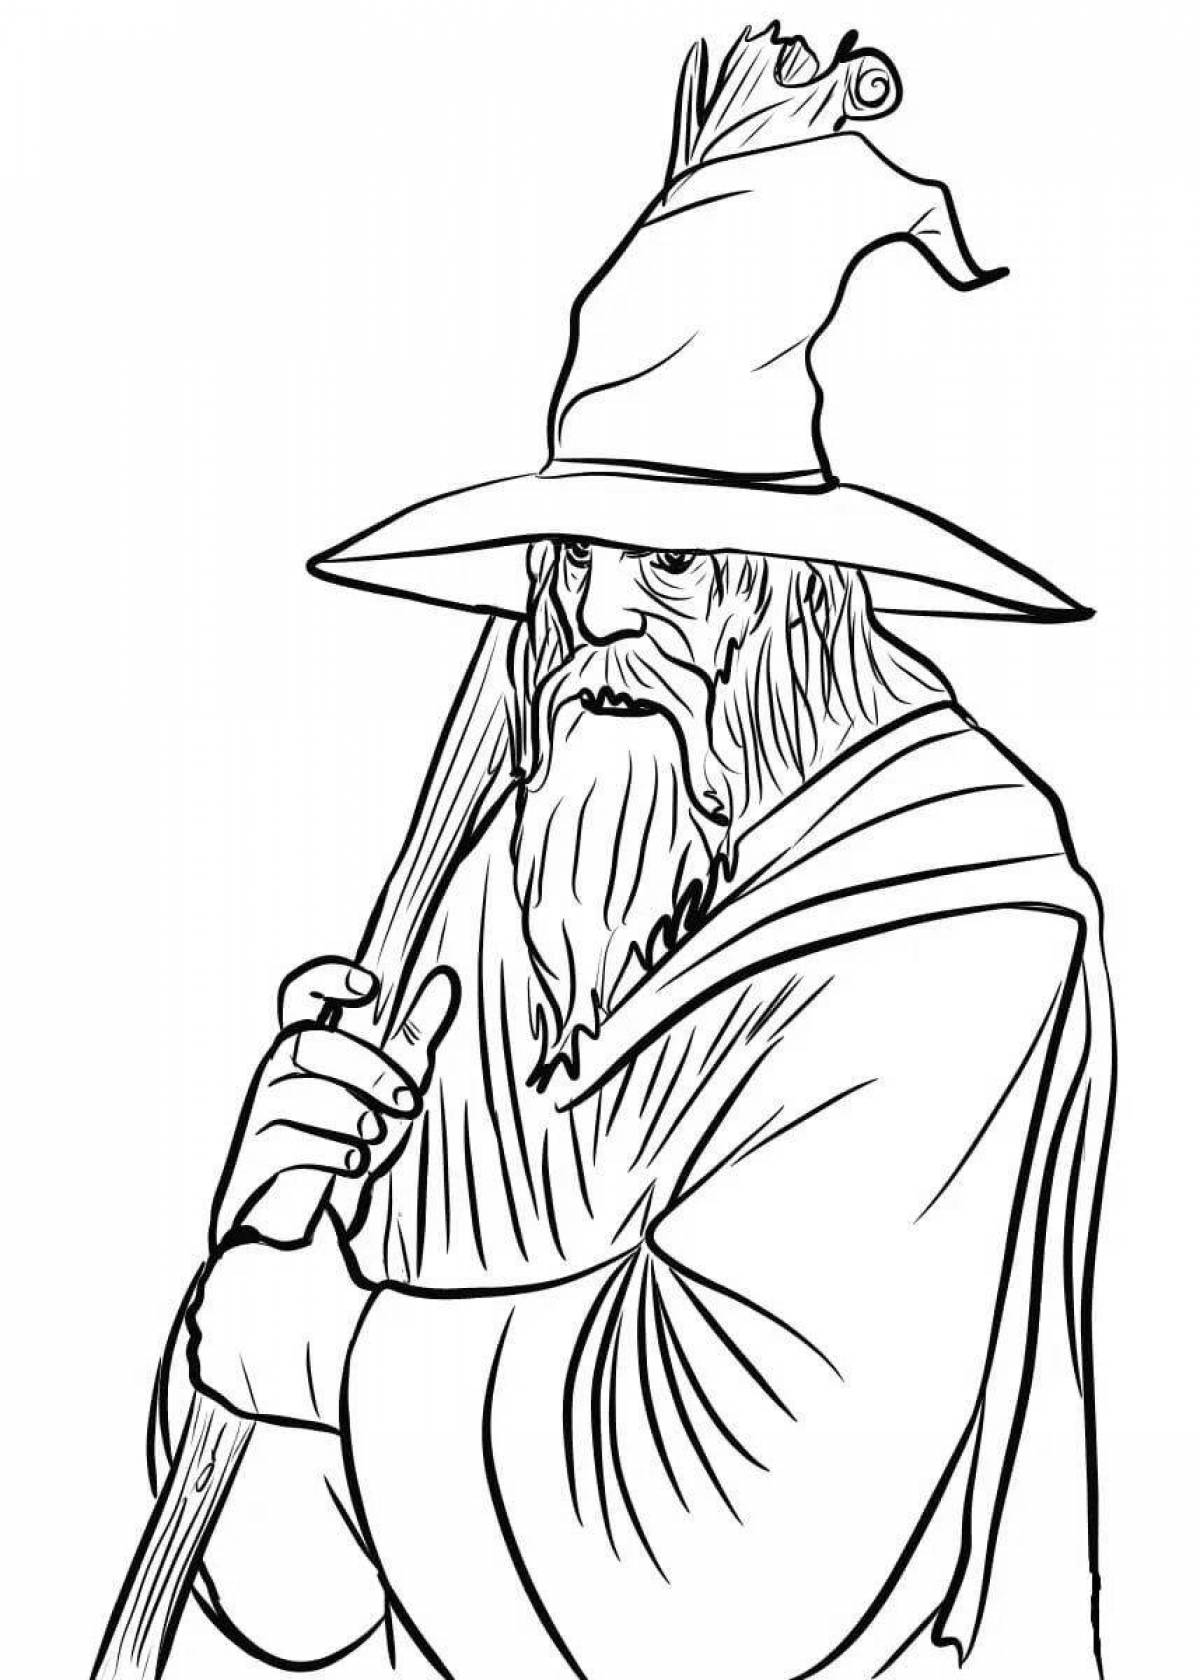 Great wizard coloring page